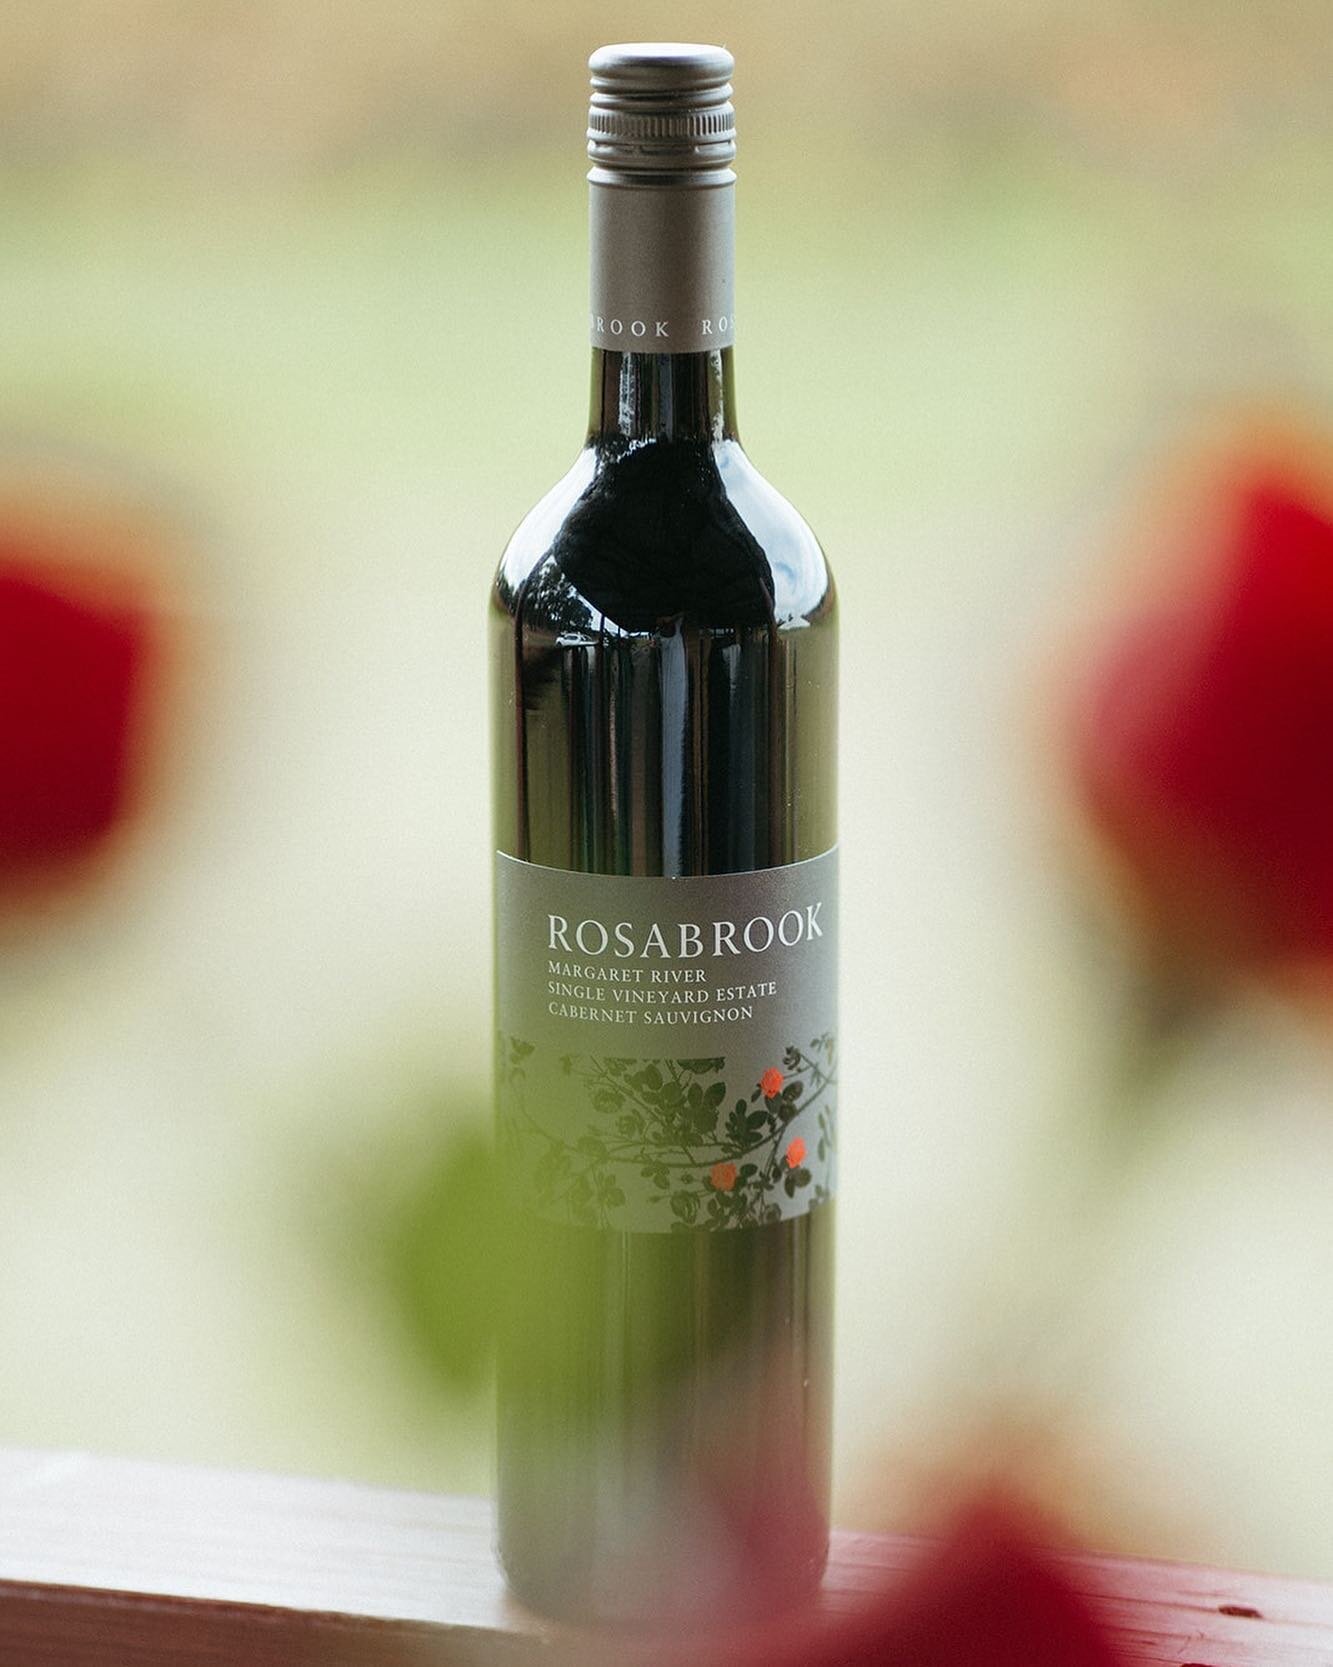 Absolutely thrilled to have been awarded 95 points by Ray Jordan in the brand new 2023 @rayjordanwine WA Wine Review for our 2018 Single Vineyard Cabernet.

&ldquo;This is a powerhouse cabernet from Rosabrook. Loads of meaty, dark chocolate and black